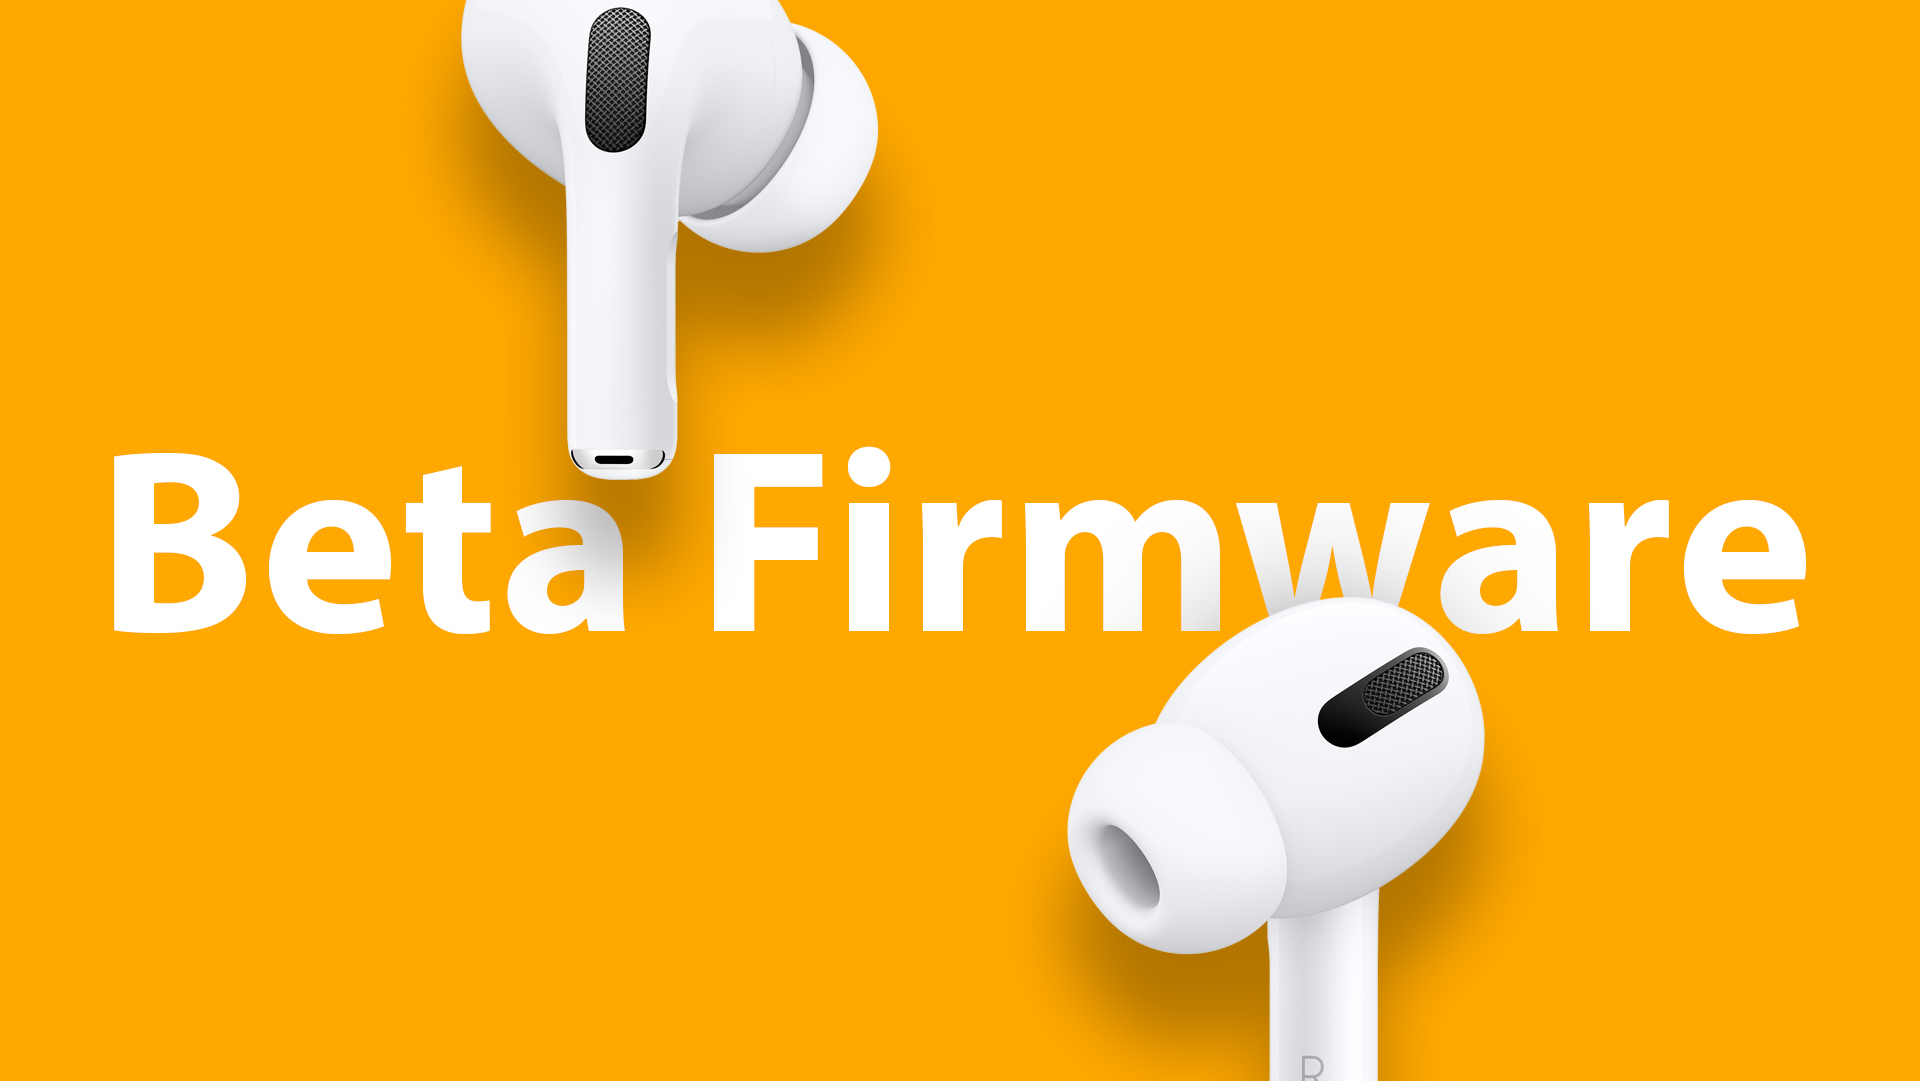 Apple Releases New Beta Firmware for AirPods, AirPods Pro, and AirPods Max With Improvements to Automatic Switching